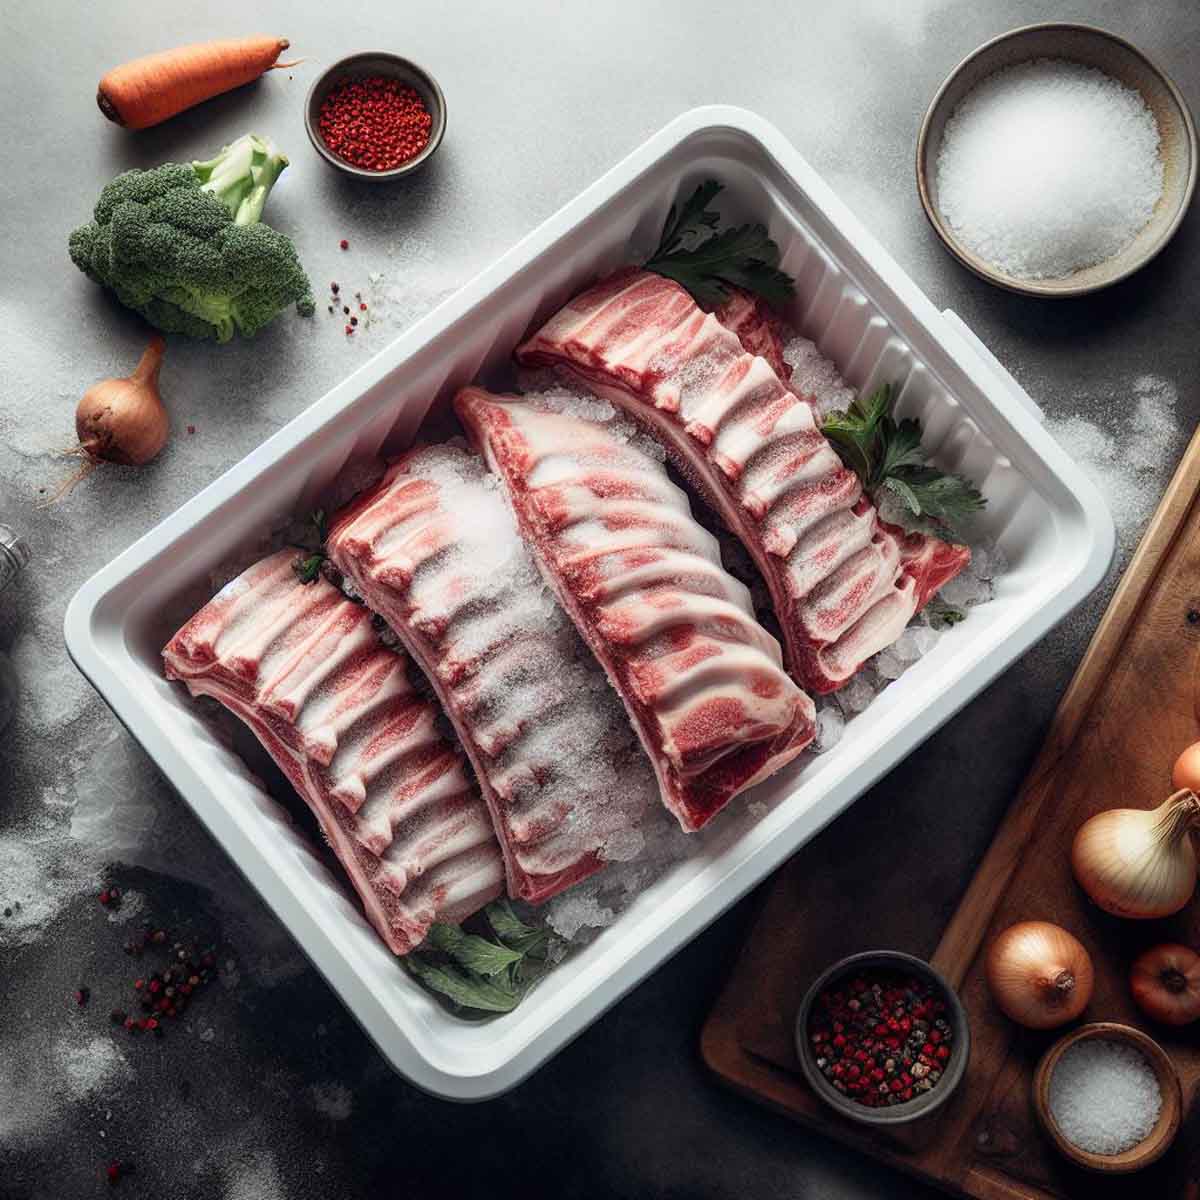 How long can you freeze ribs? A stack of raw pork ribs neatly arranged, showcasing their natural curve and clean cut, ready for freezing.